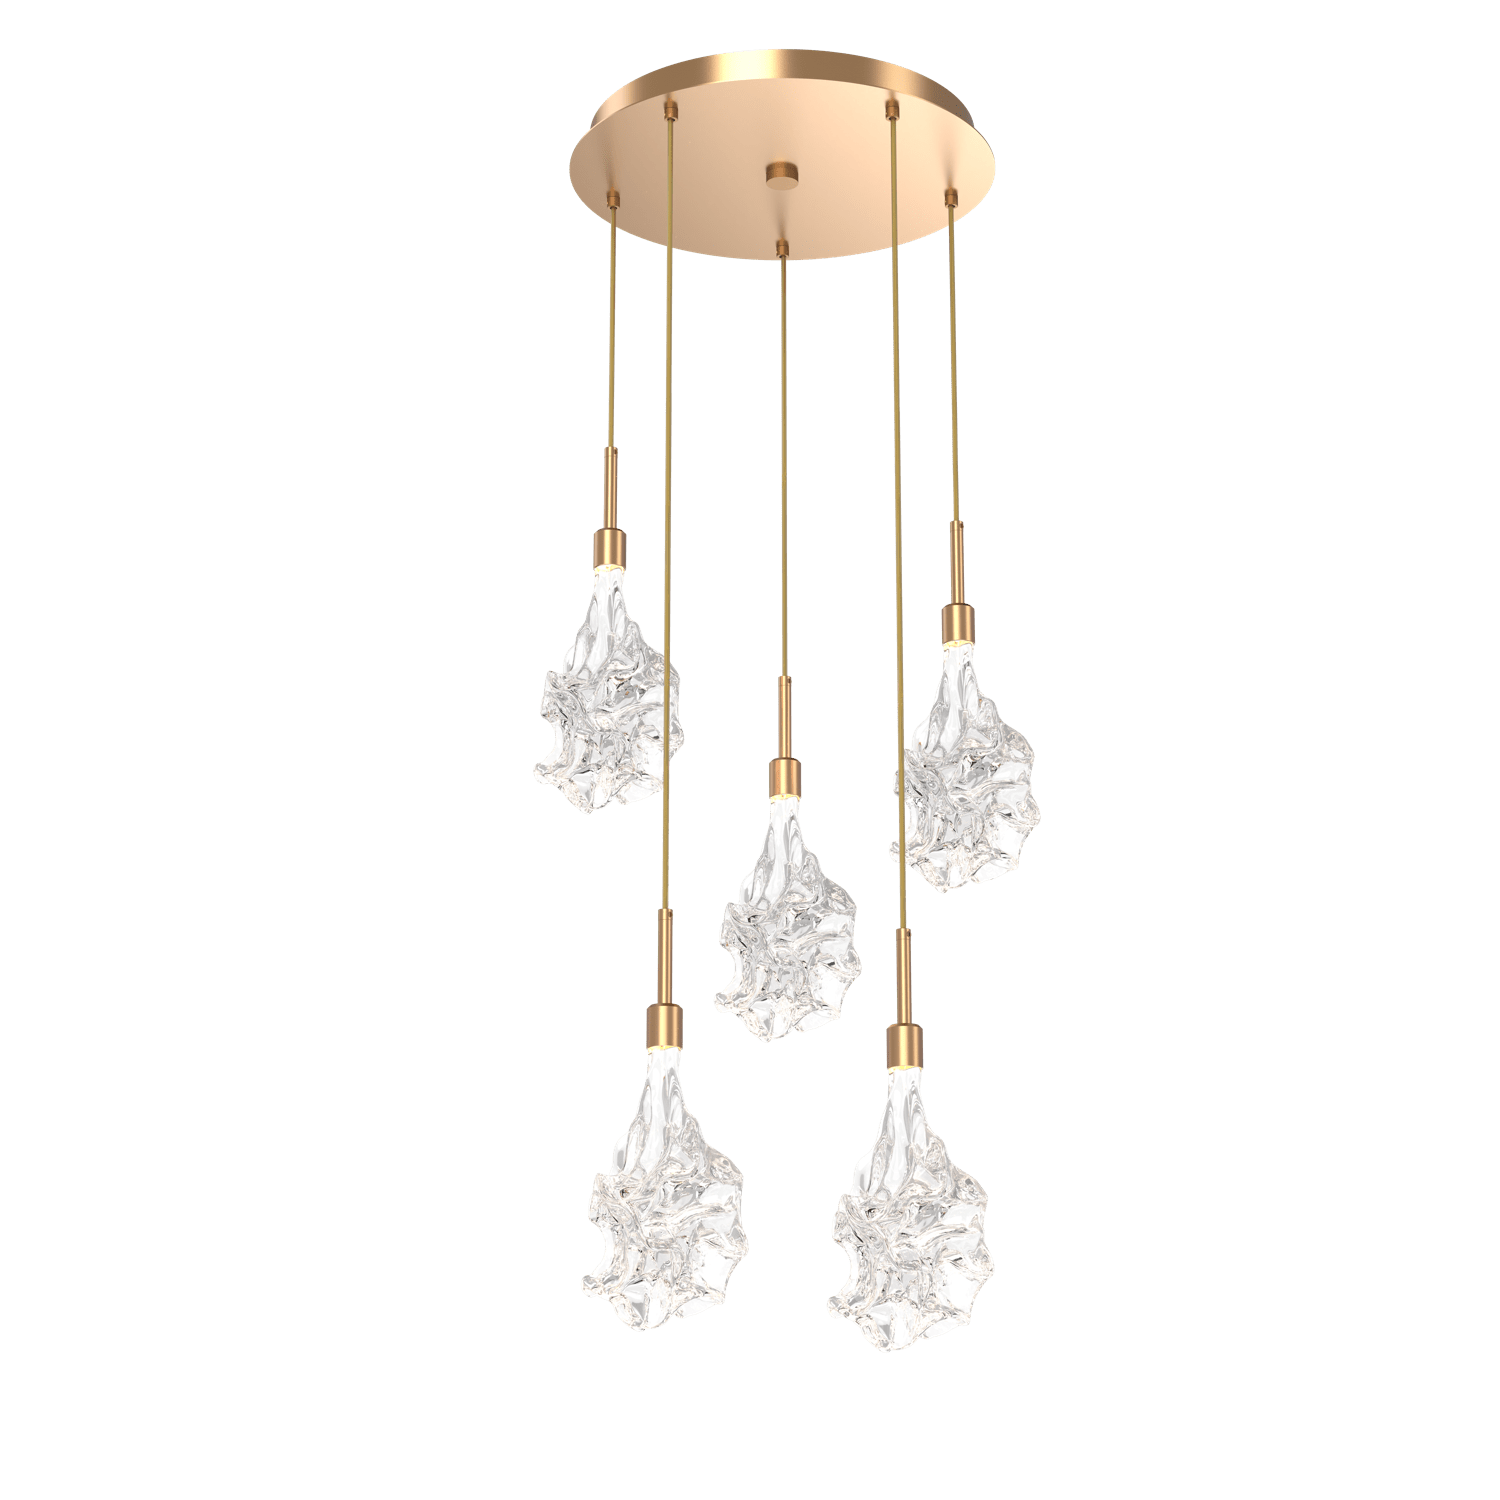 CHB0059-05-NB-Hammerton-Studio-Blossom-5-light-round-pendant-chandelier-with-novel-brass-finish-and-clear-handblown-crystal-glass-shades-and-LED-lamping